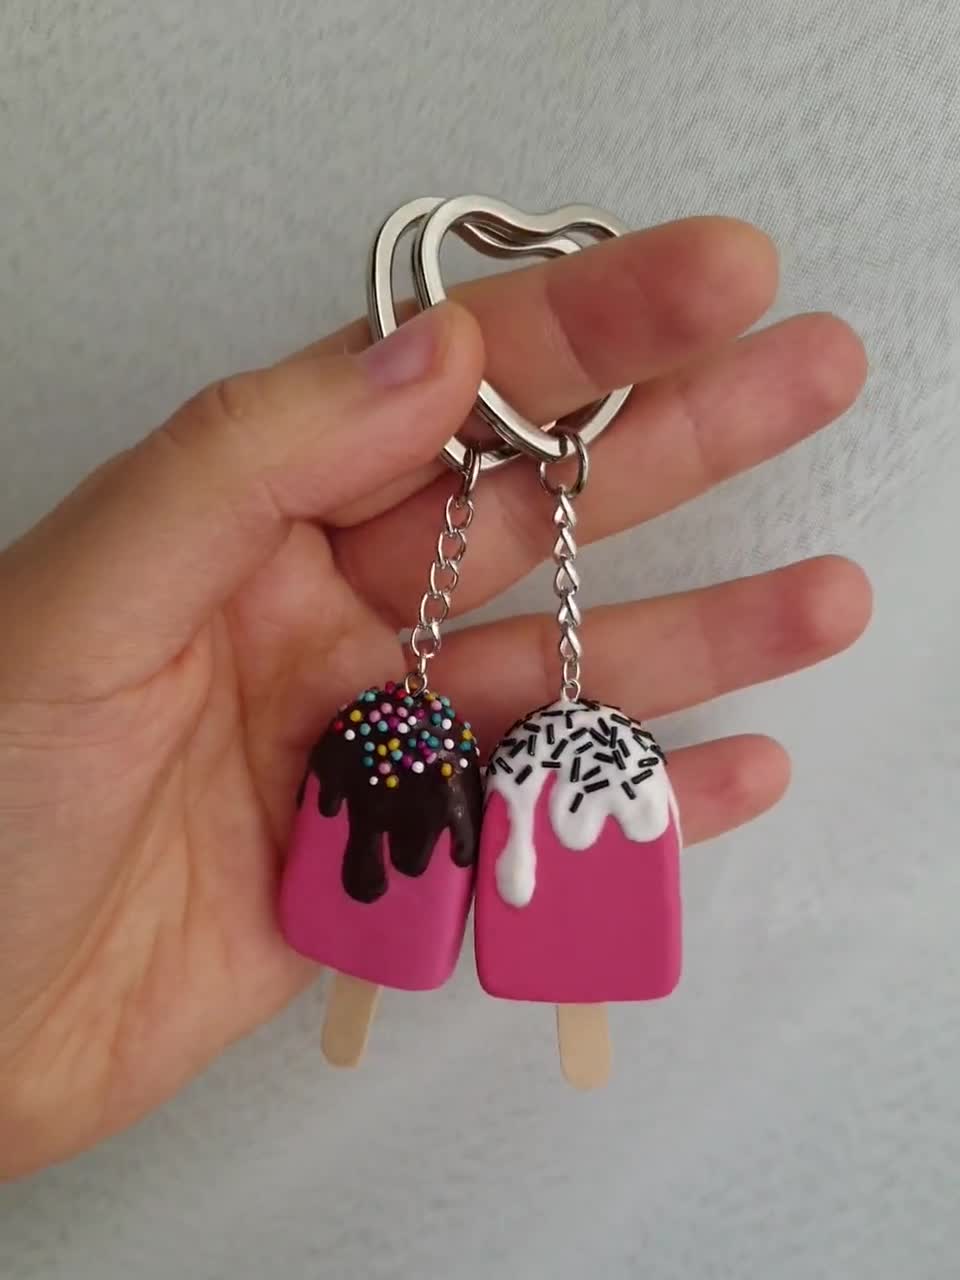 Sunset Popsicle Keychain